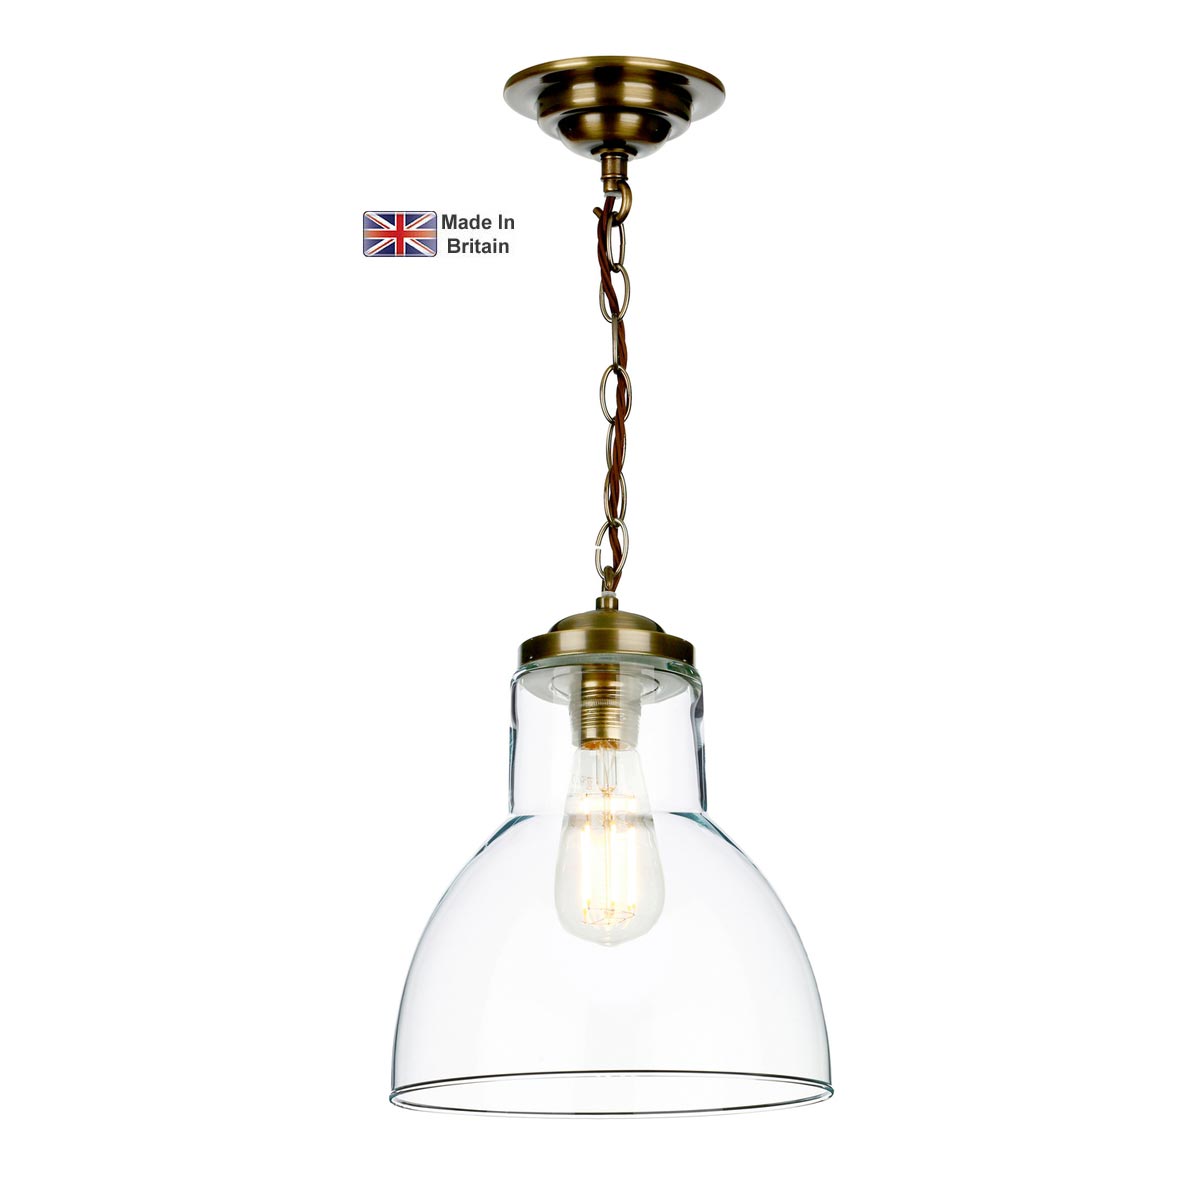 Upton Small Pendant Light Antique Brass Clear Glass Shade